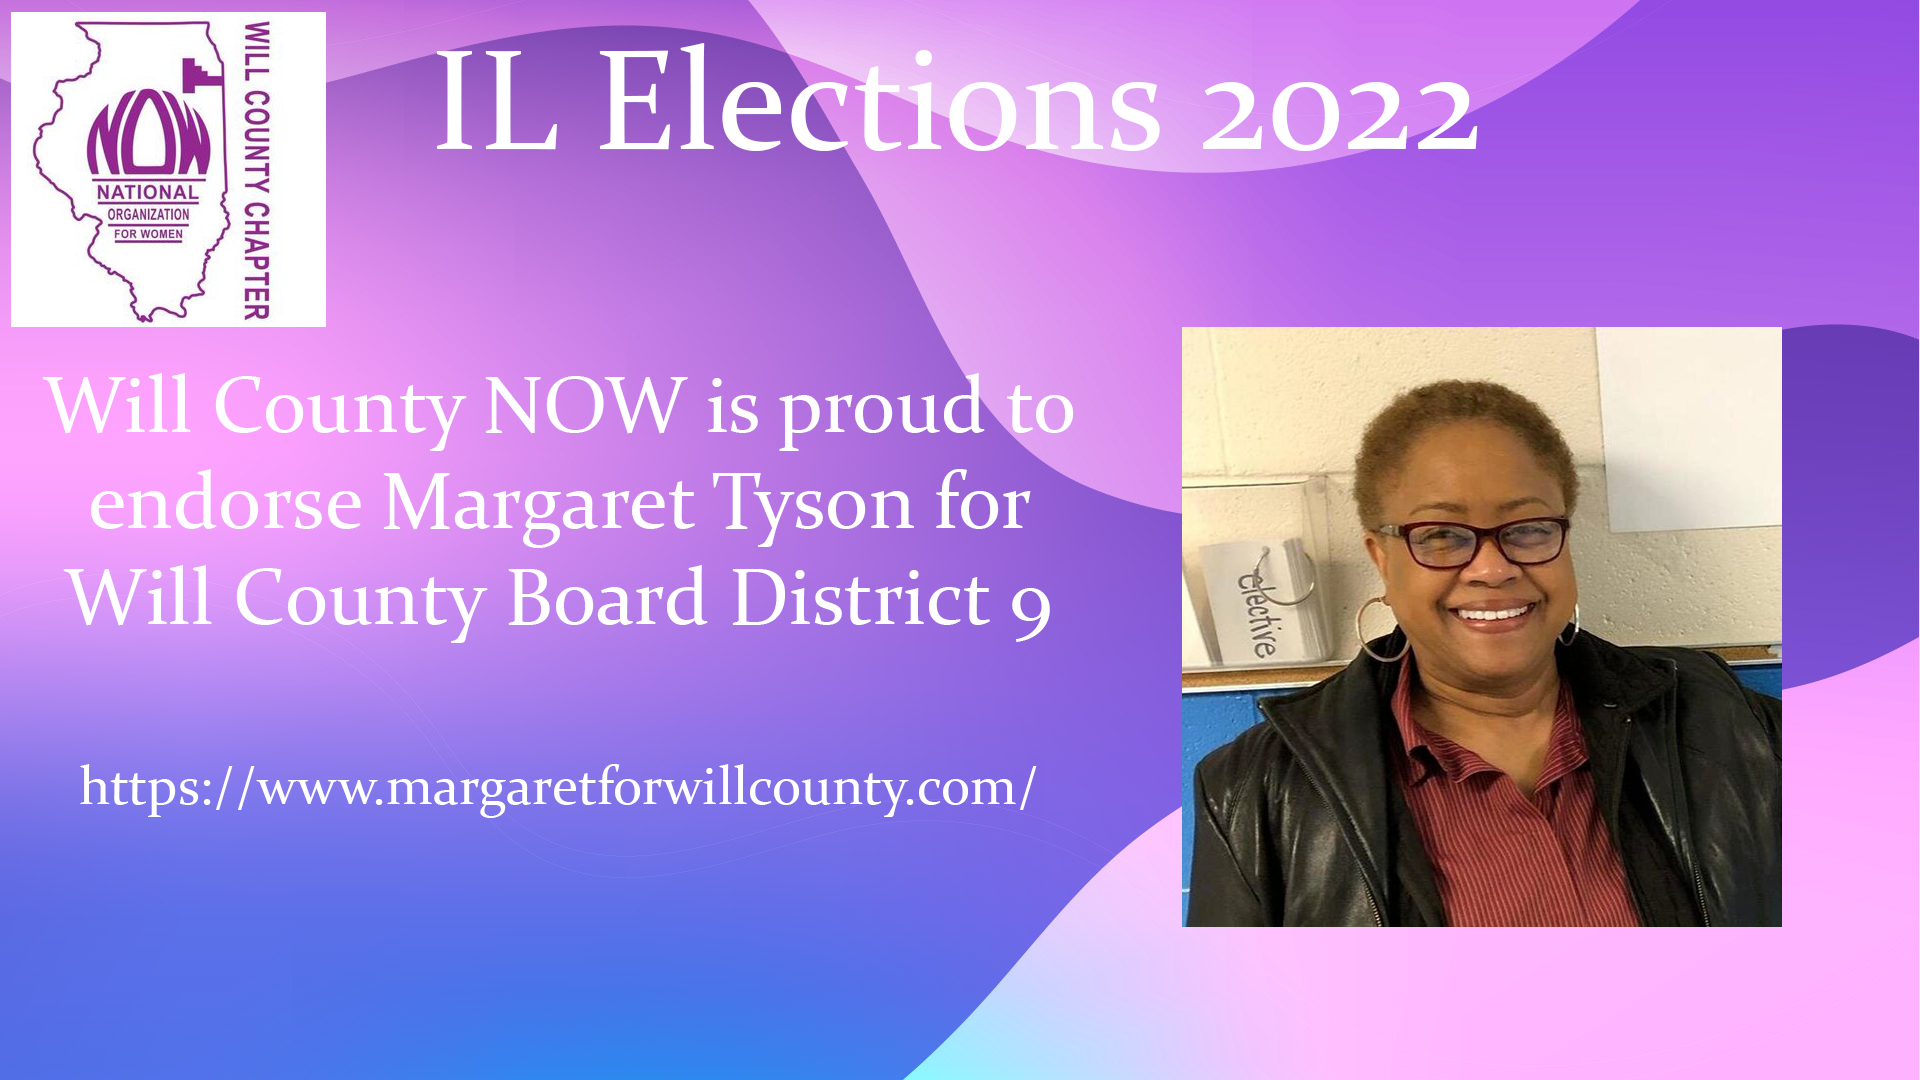 Will County NOW Endorses Margaret Tyson for Will County Board District 9